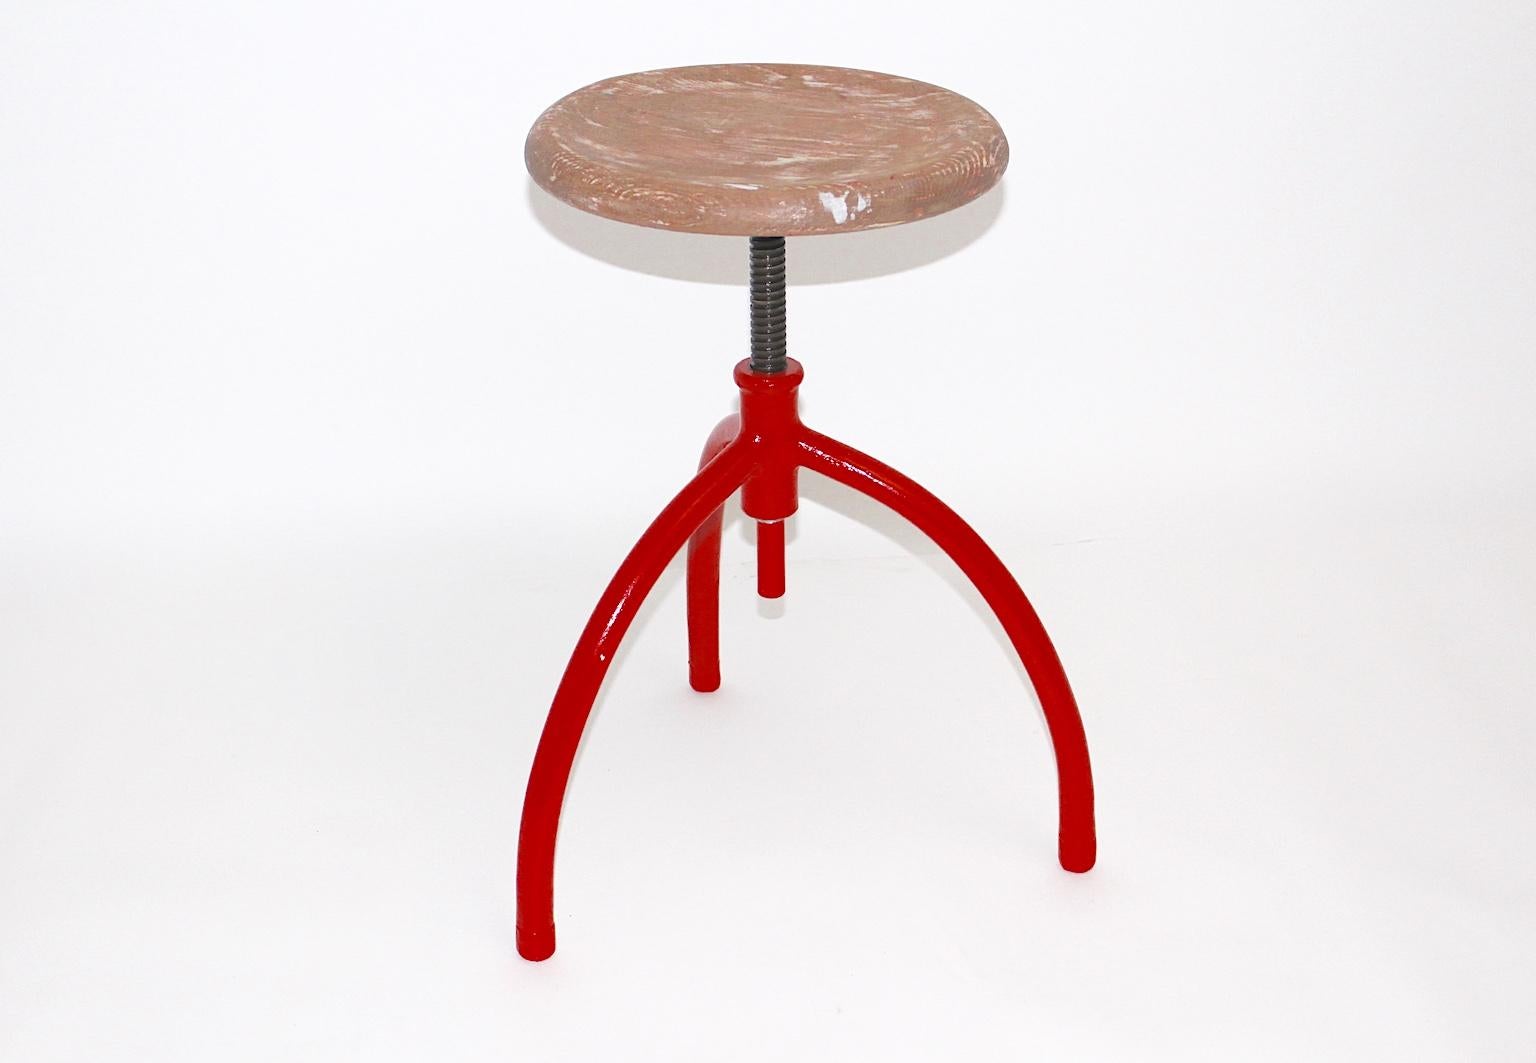 Austrian Vintage Red Metal Swiveling Stool by Margarete Schuette-Lihotzky, 1920s For Sale